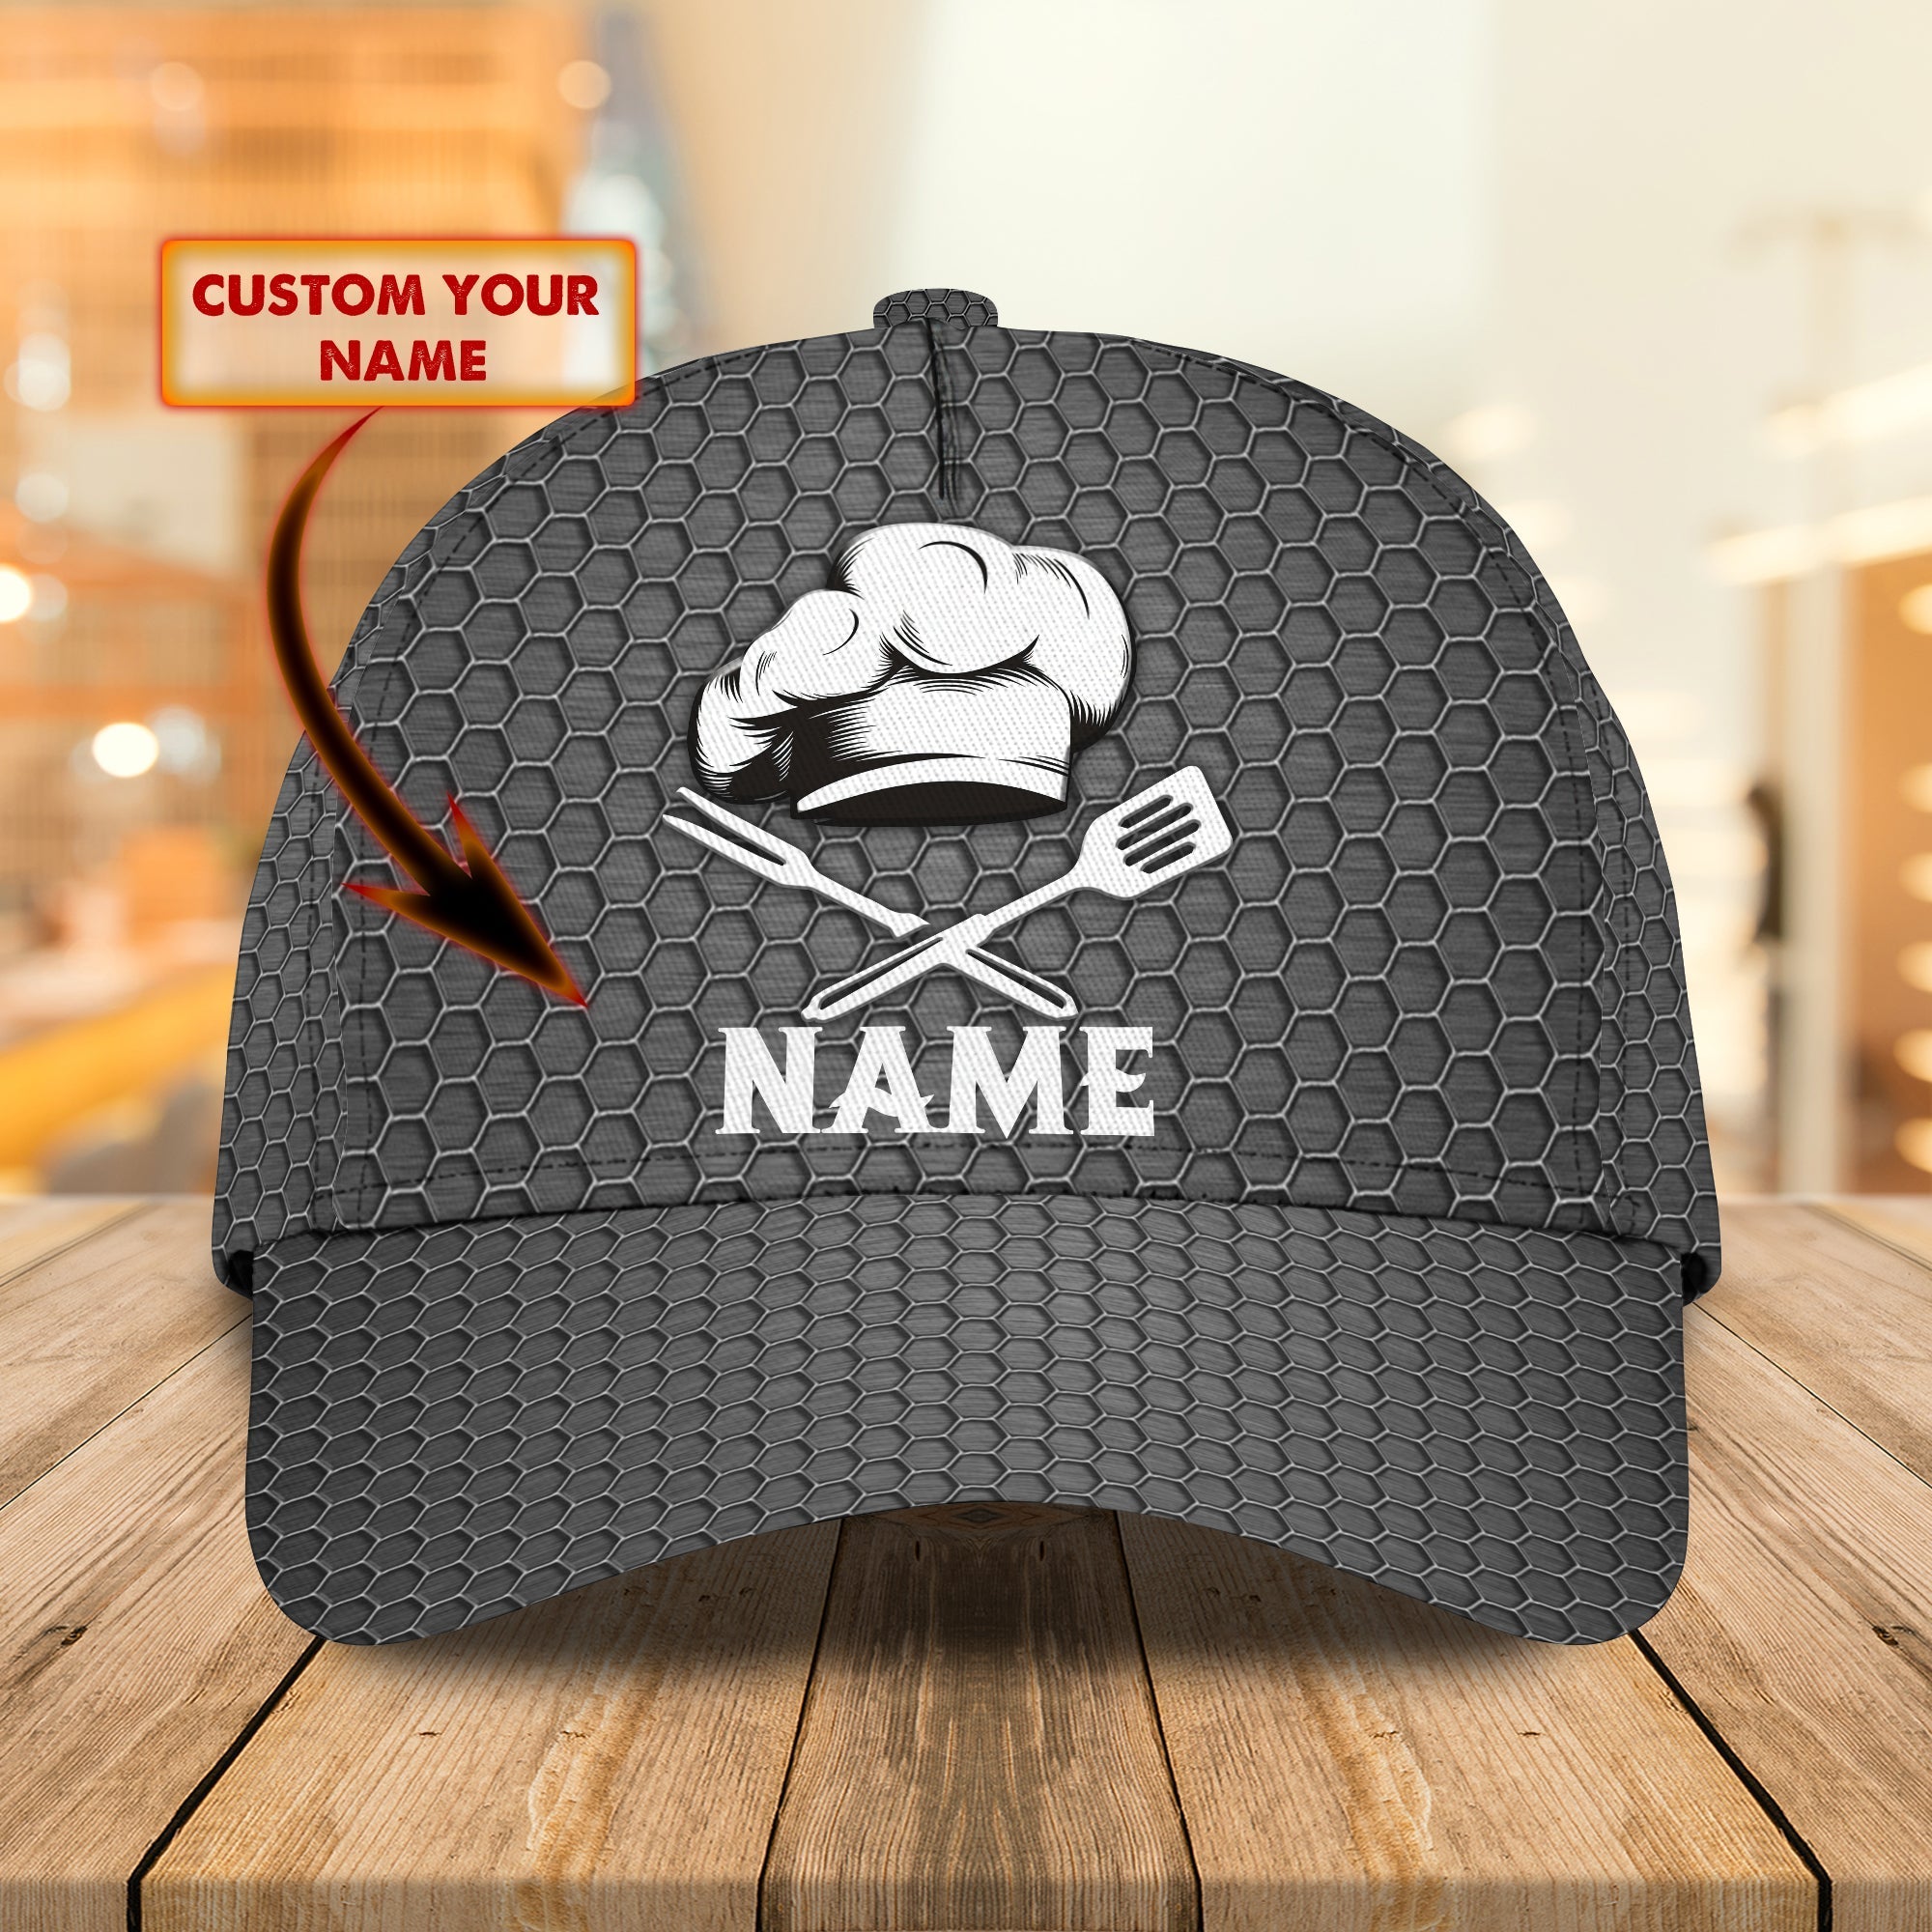 Customized 3D Full Printed Chef Cap/ Baseball Chef Hat/ Classic Cap For A Master Chef/ Cooking Lover Gift